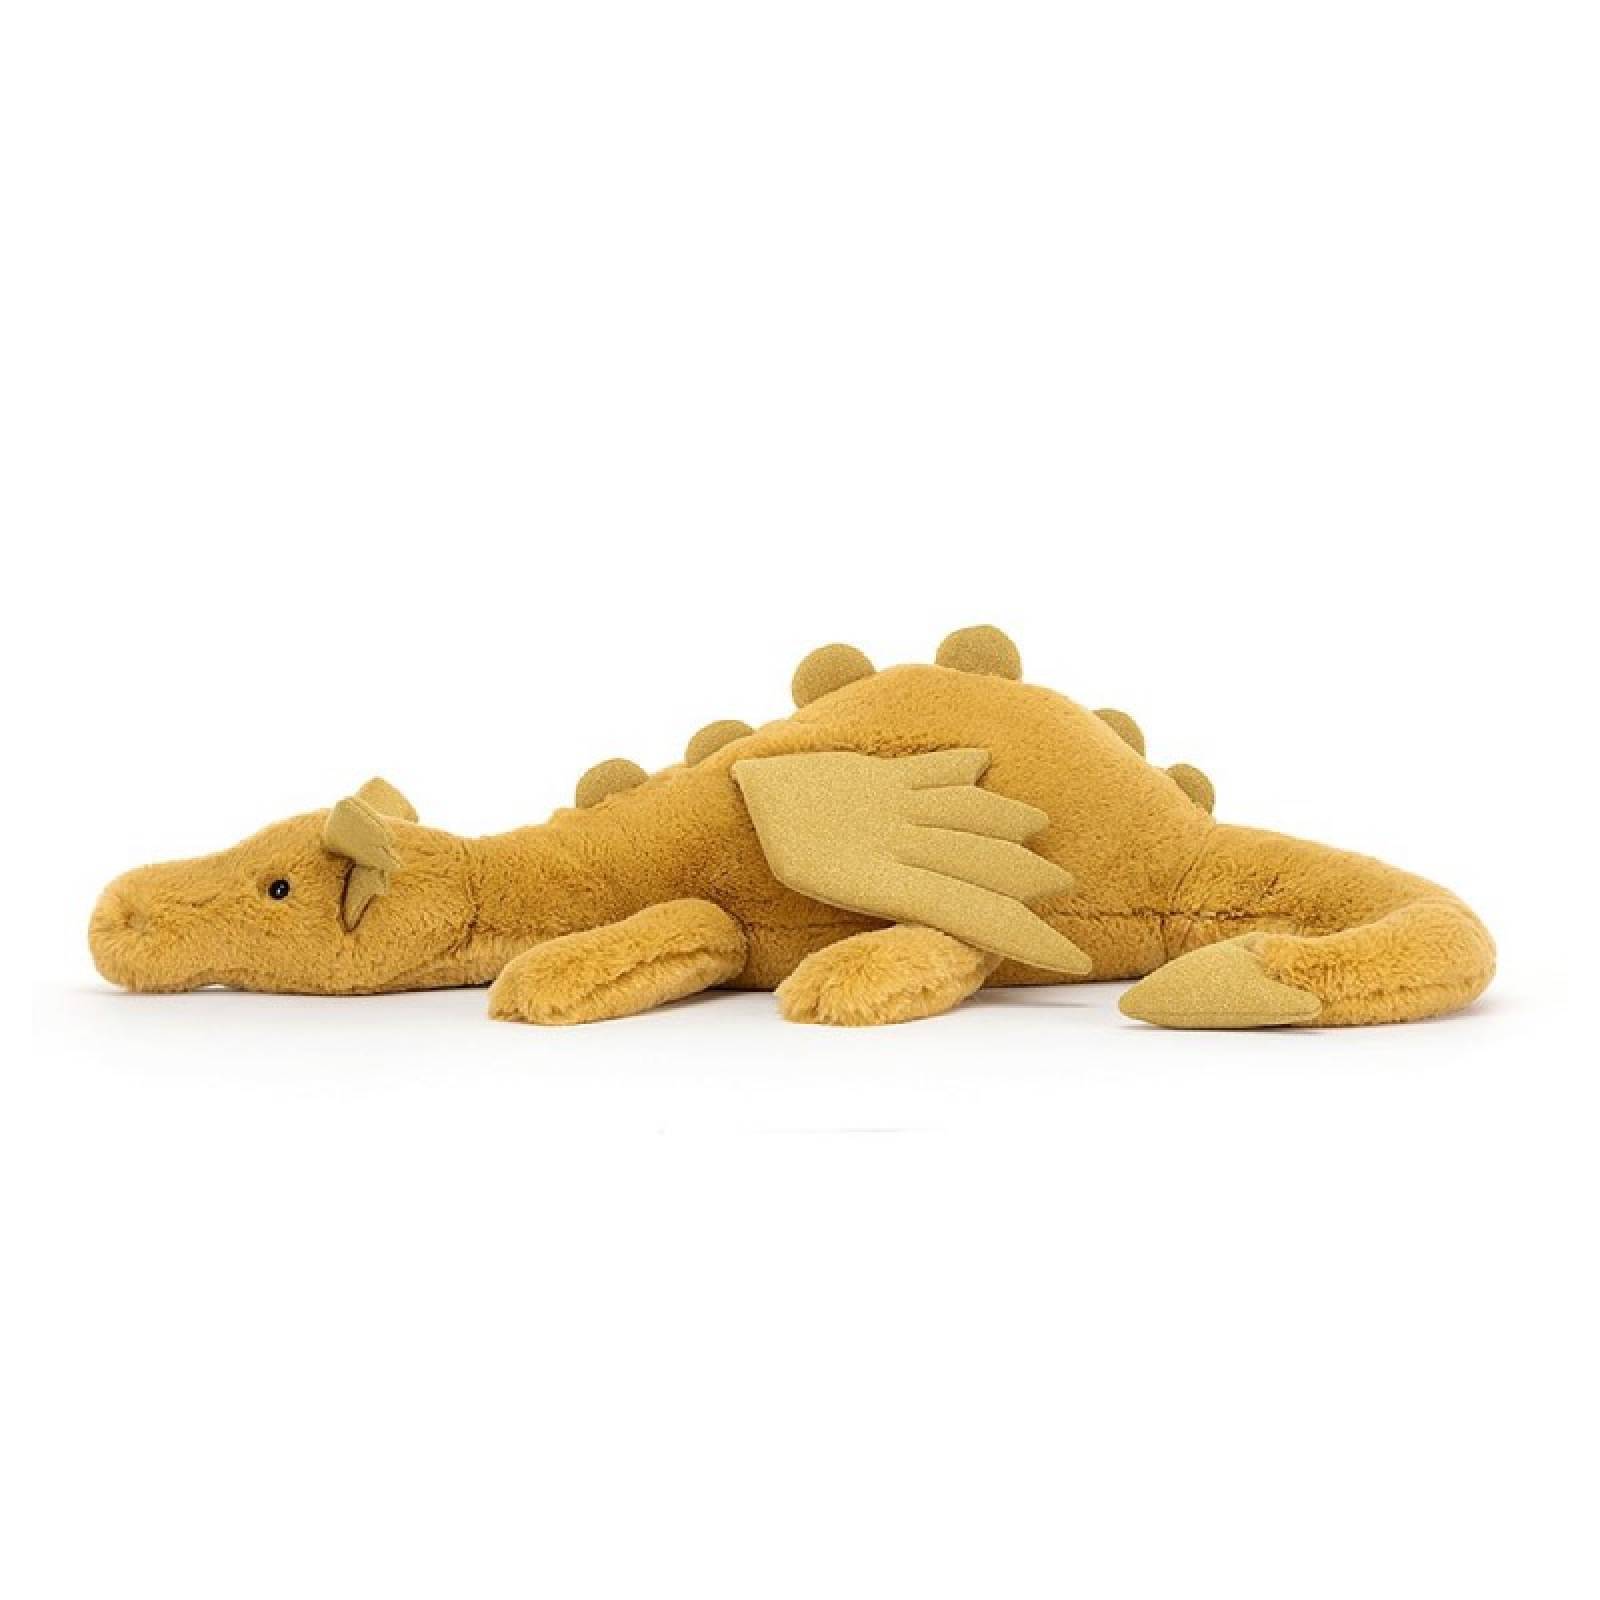 Huge Golden Dragon Soft Toy By Jellycat 0+ thumbnails